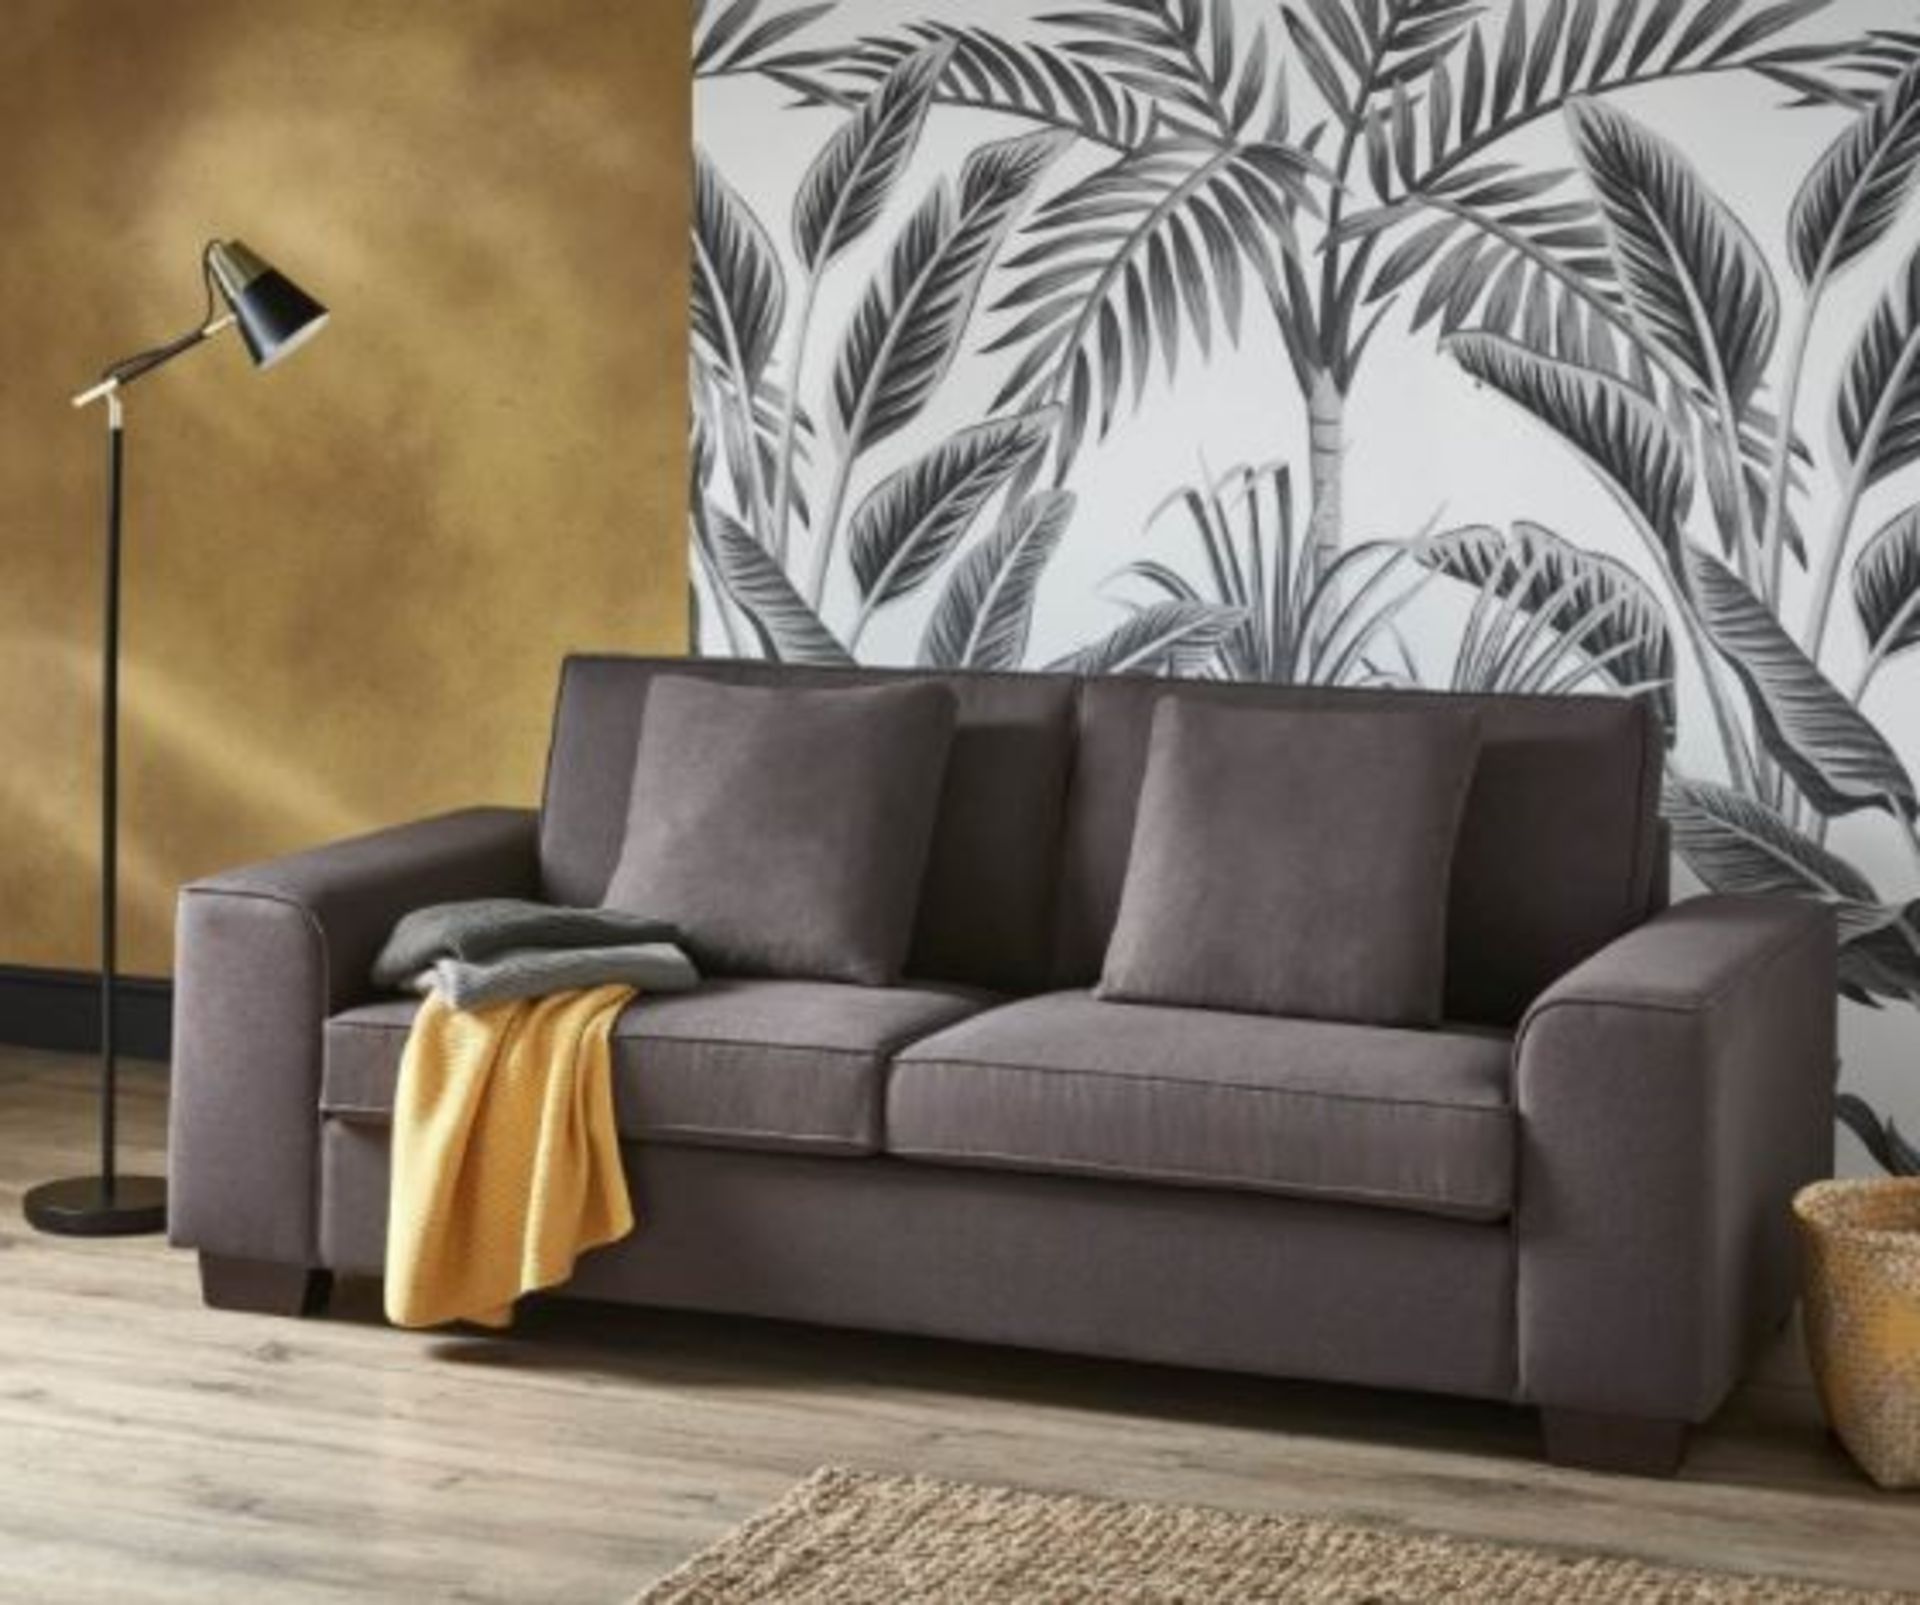 1 X Lola Sofa Charcoal. Wooden Frame With Solid Beechwood Legs. 100% Polyester Fabric Cover (H80xW2 - Image 2 of 6